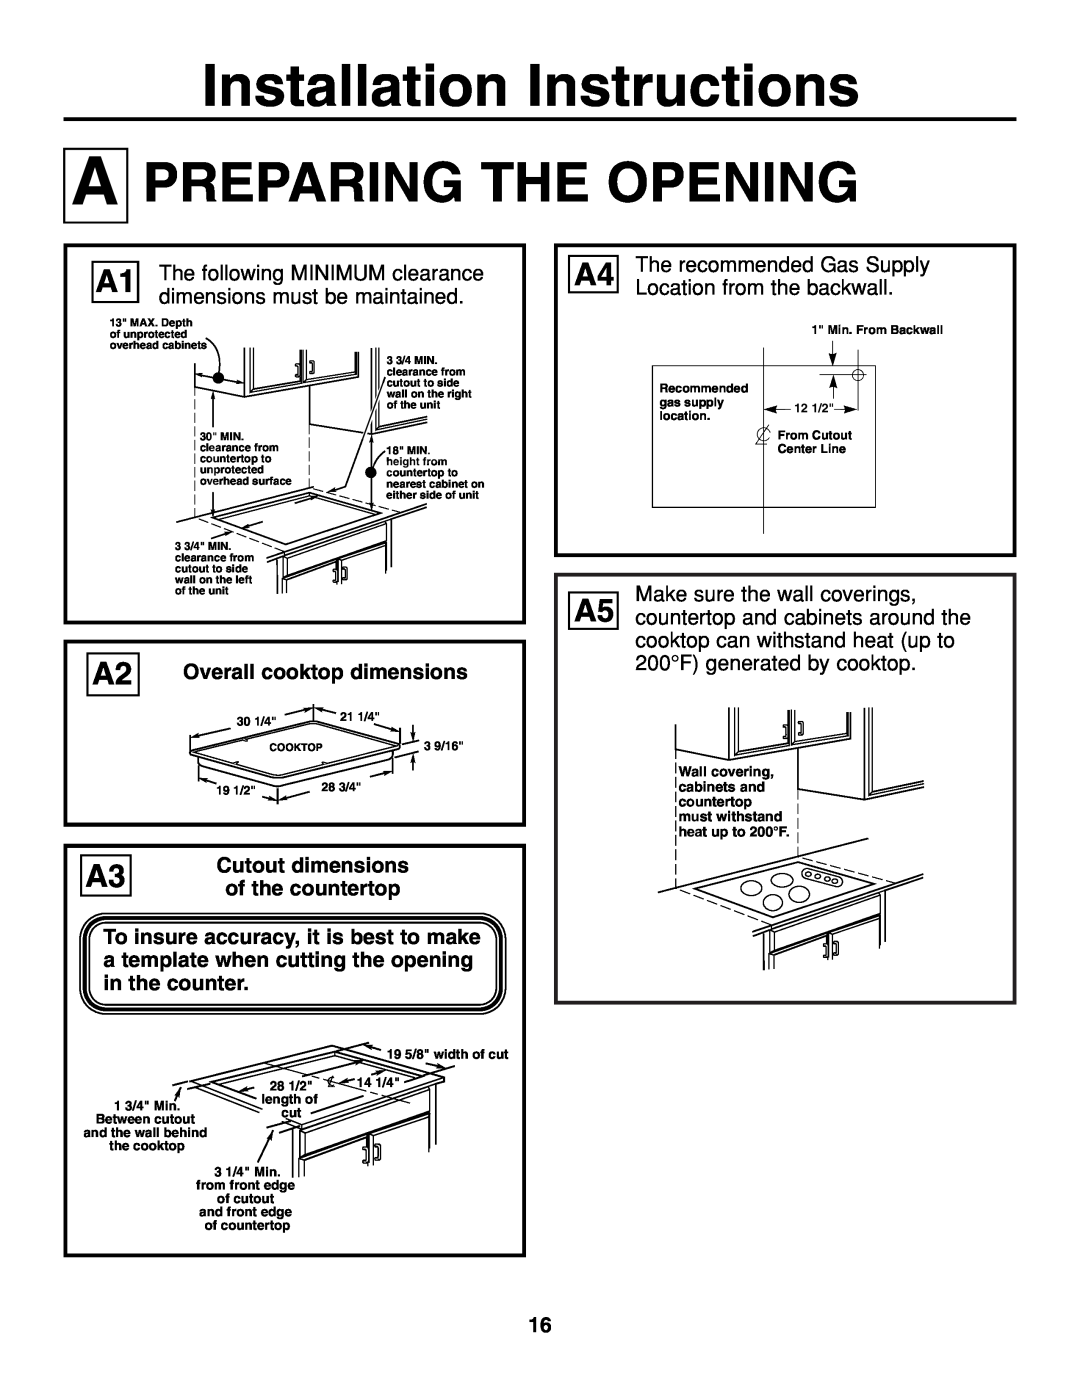 GE JGP319, JGP321 Preparing The Opening, Installation Instructions, 19 5/8 width of cut, 14 1/4, length of, the cooktop 